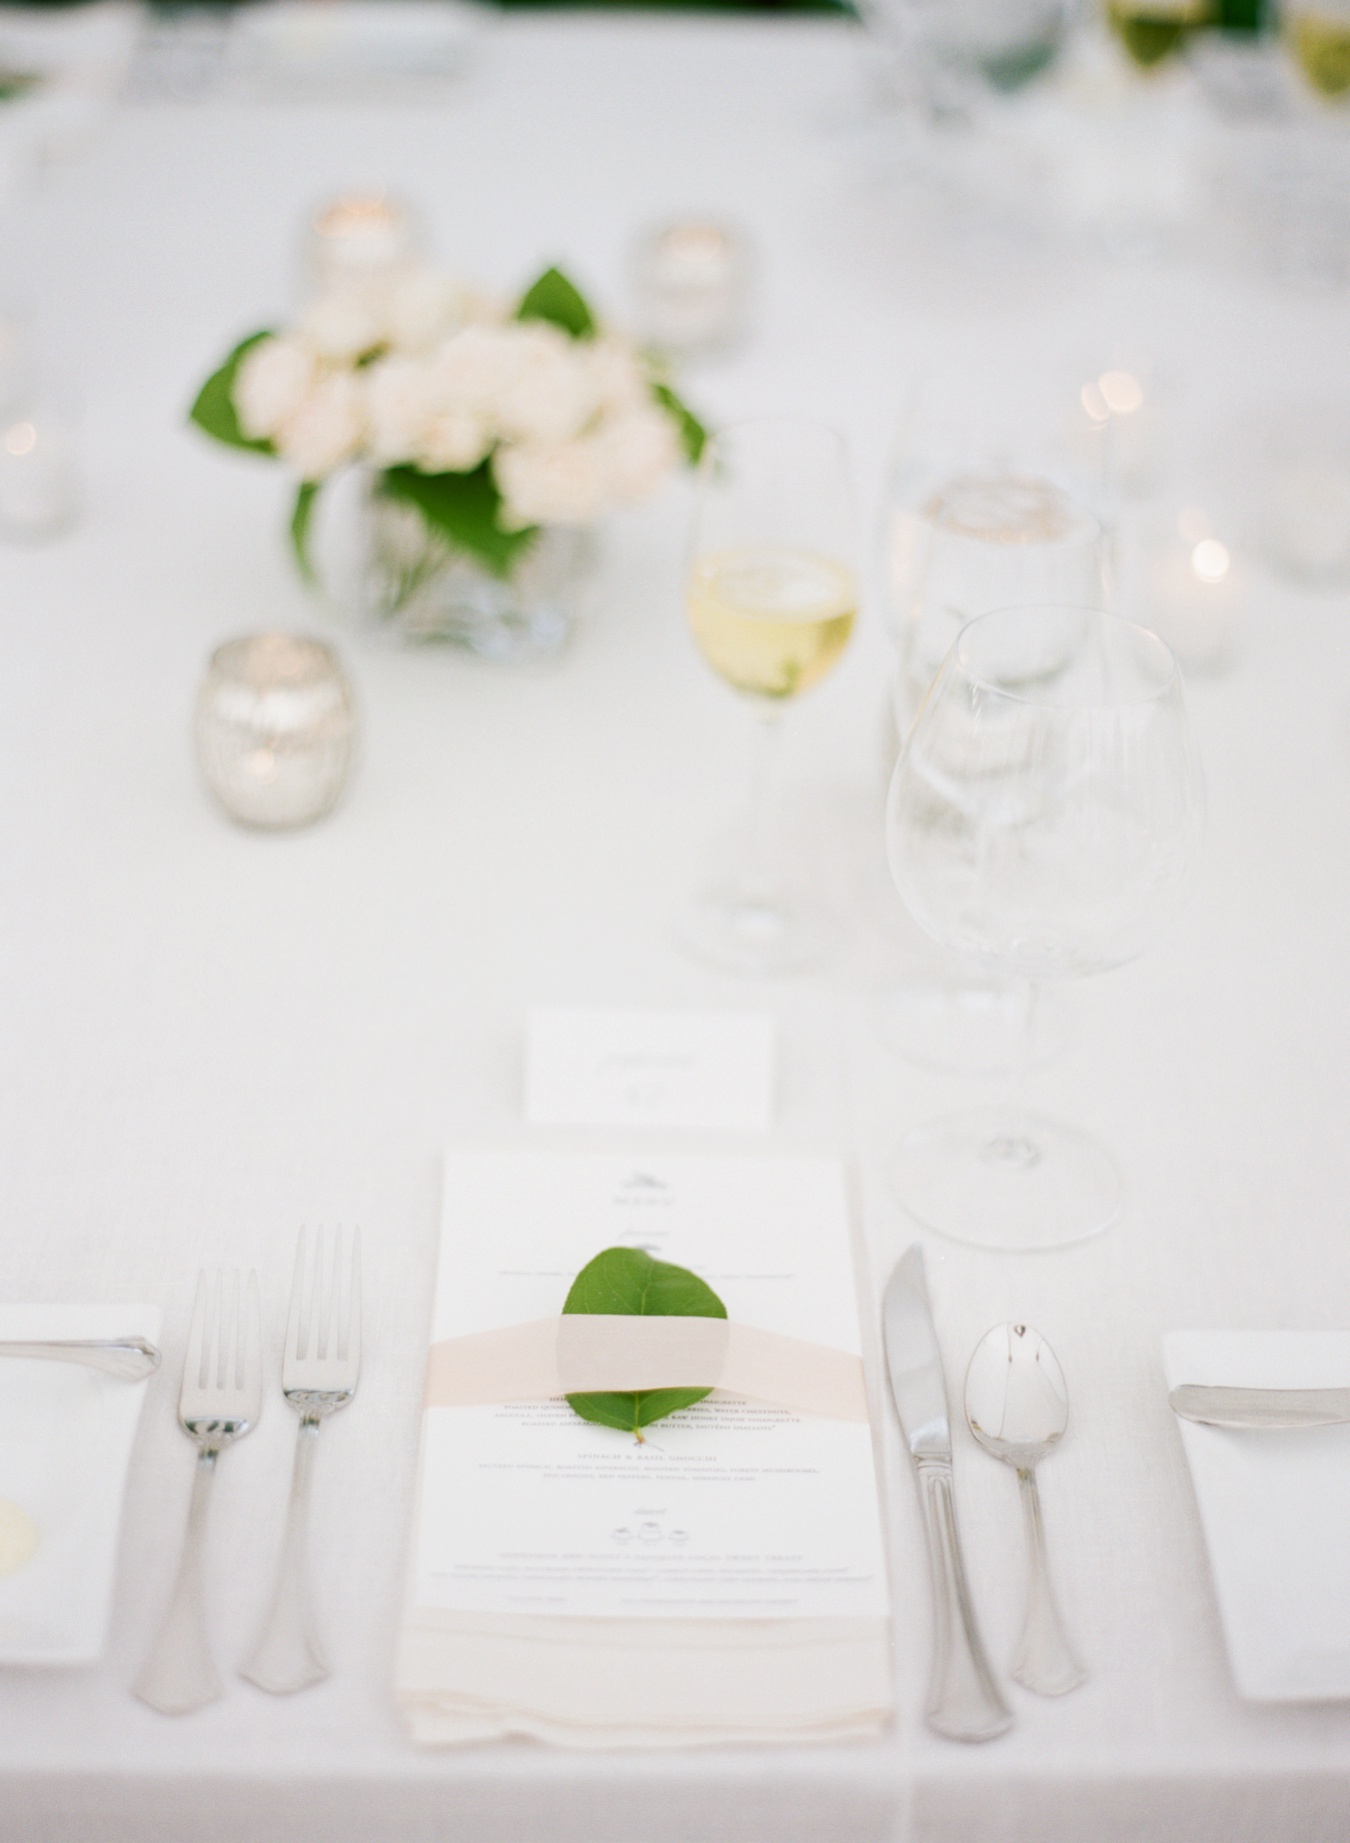 Sincerely Ginger Event Design | Cory Weber Photography